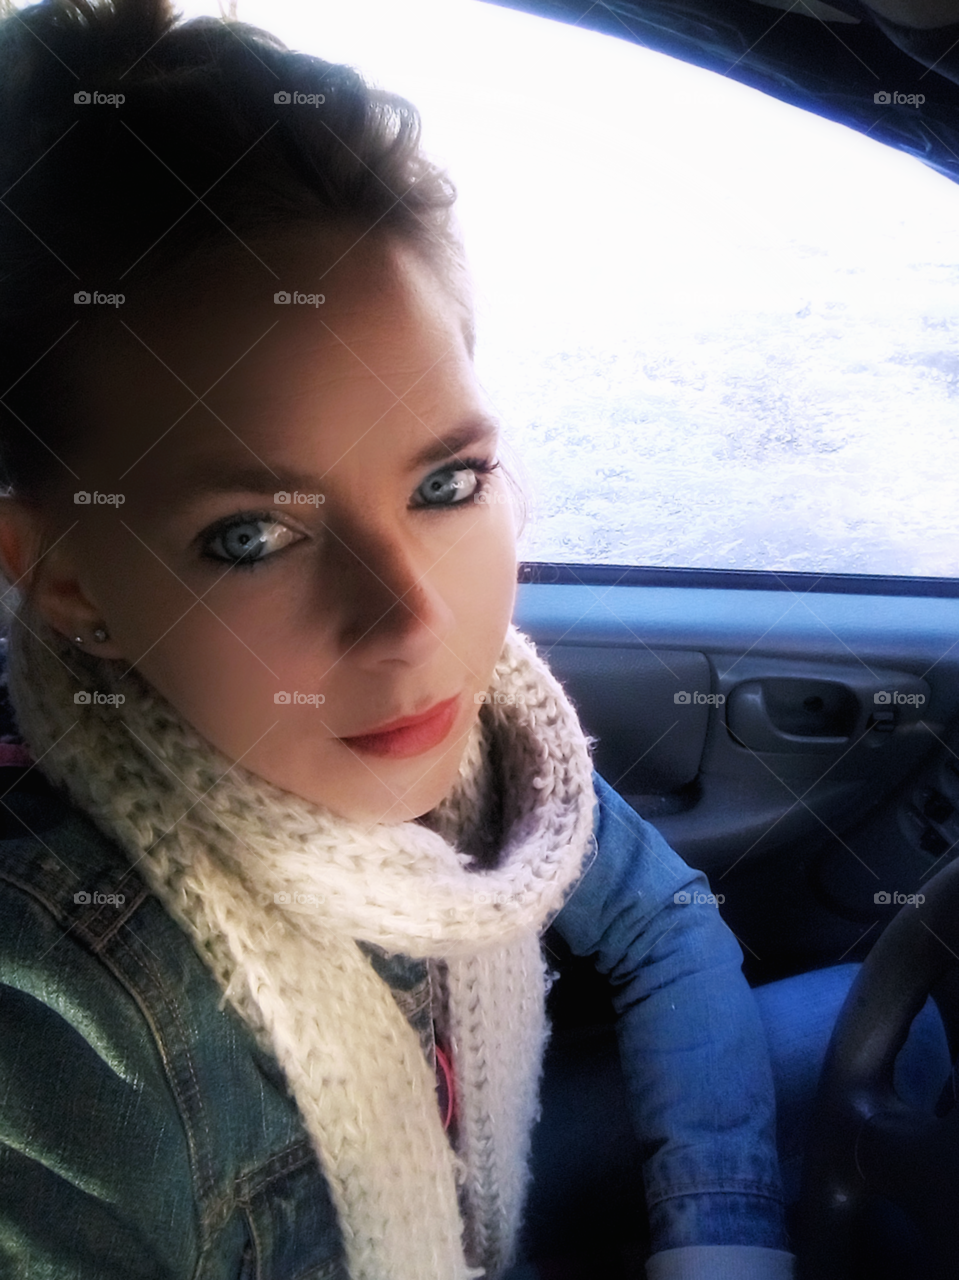 woman wearing scarf sitting in a car next to window showing snow outside